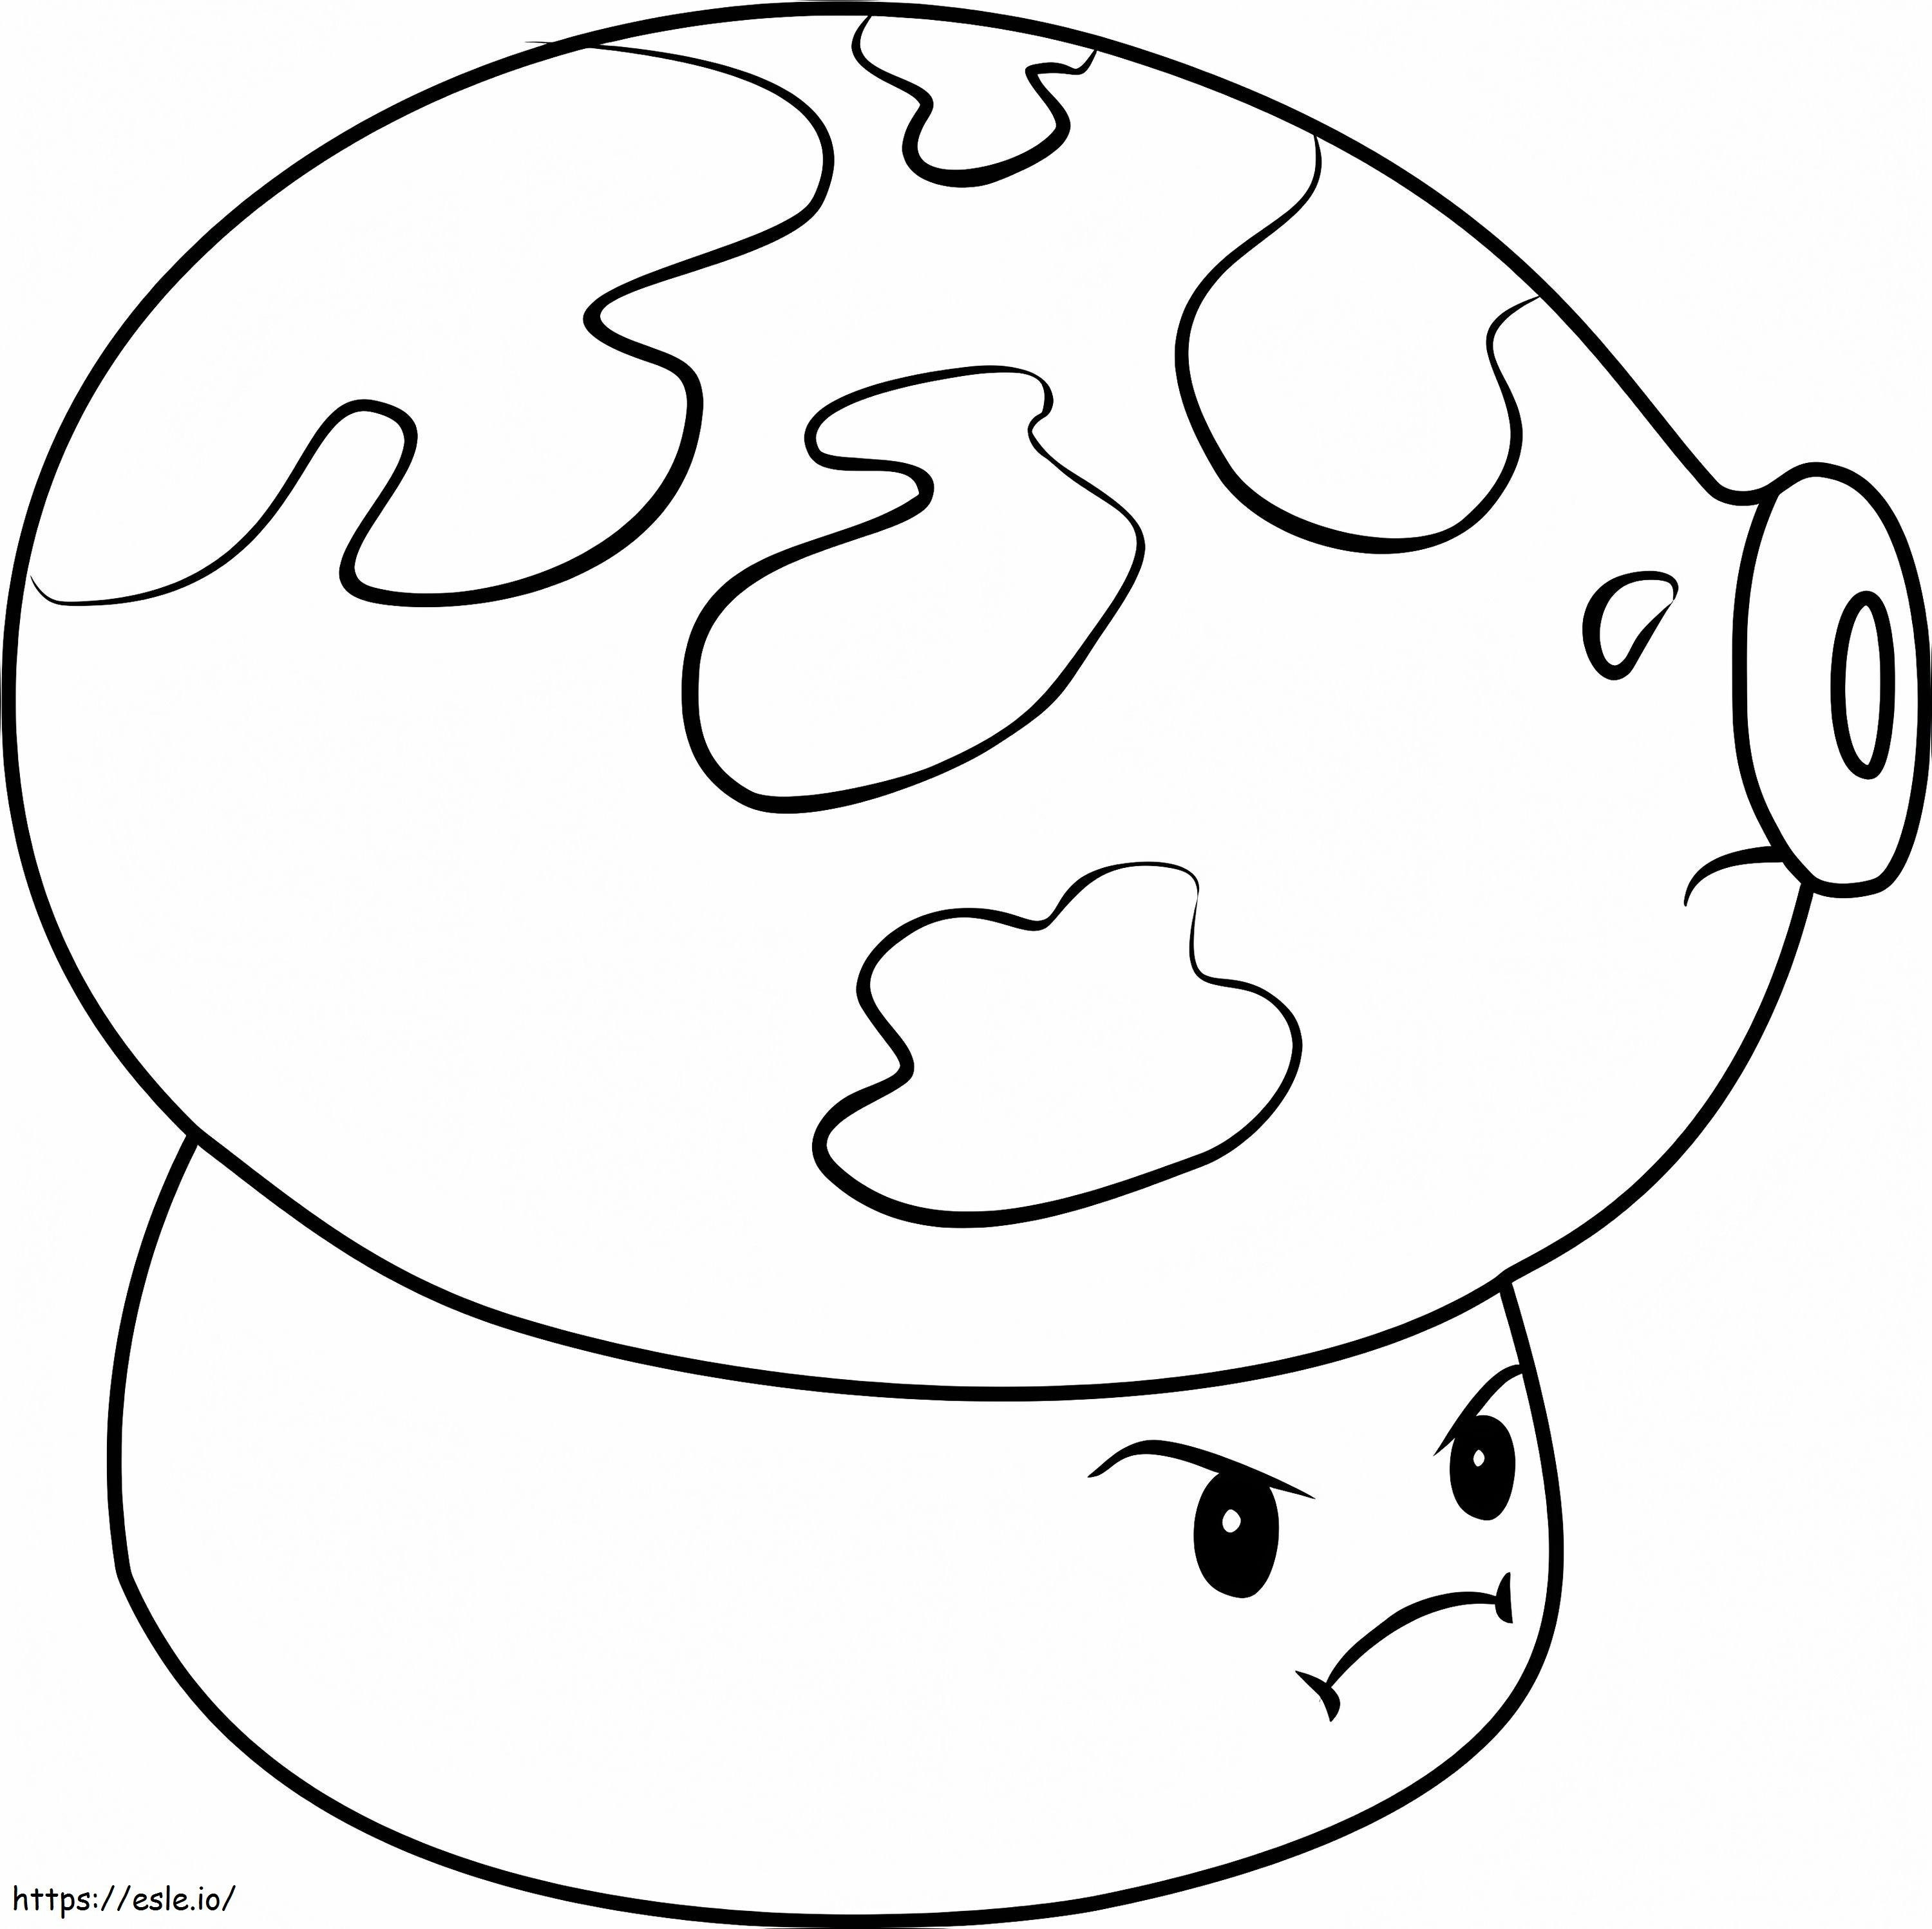 1530497569 Fume Shroom1 coloring page